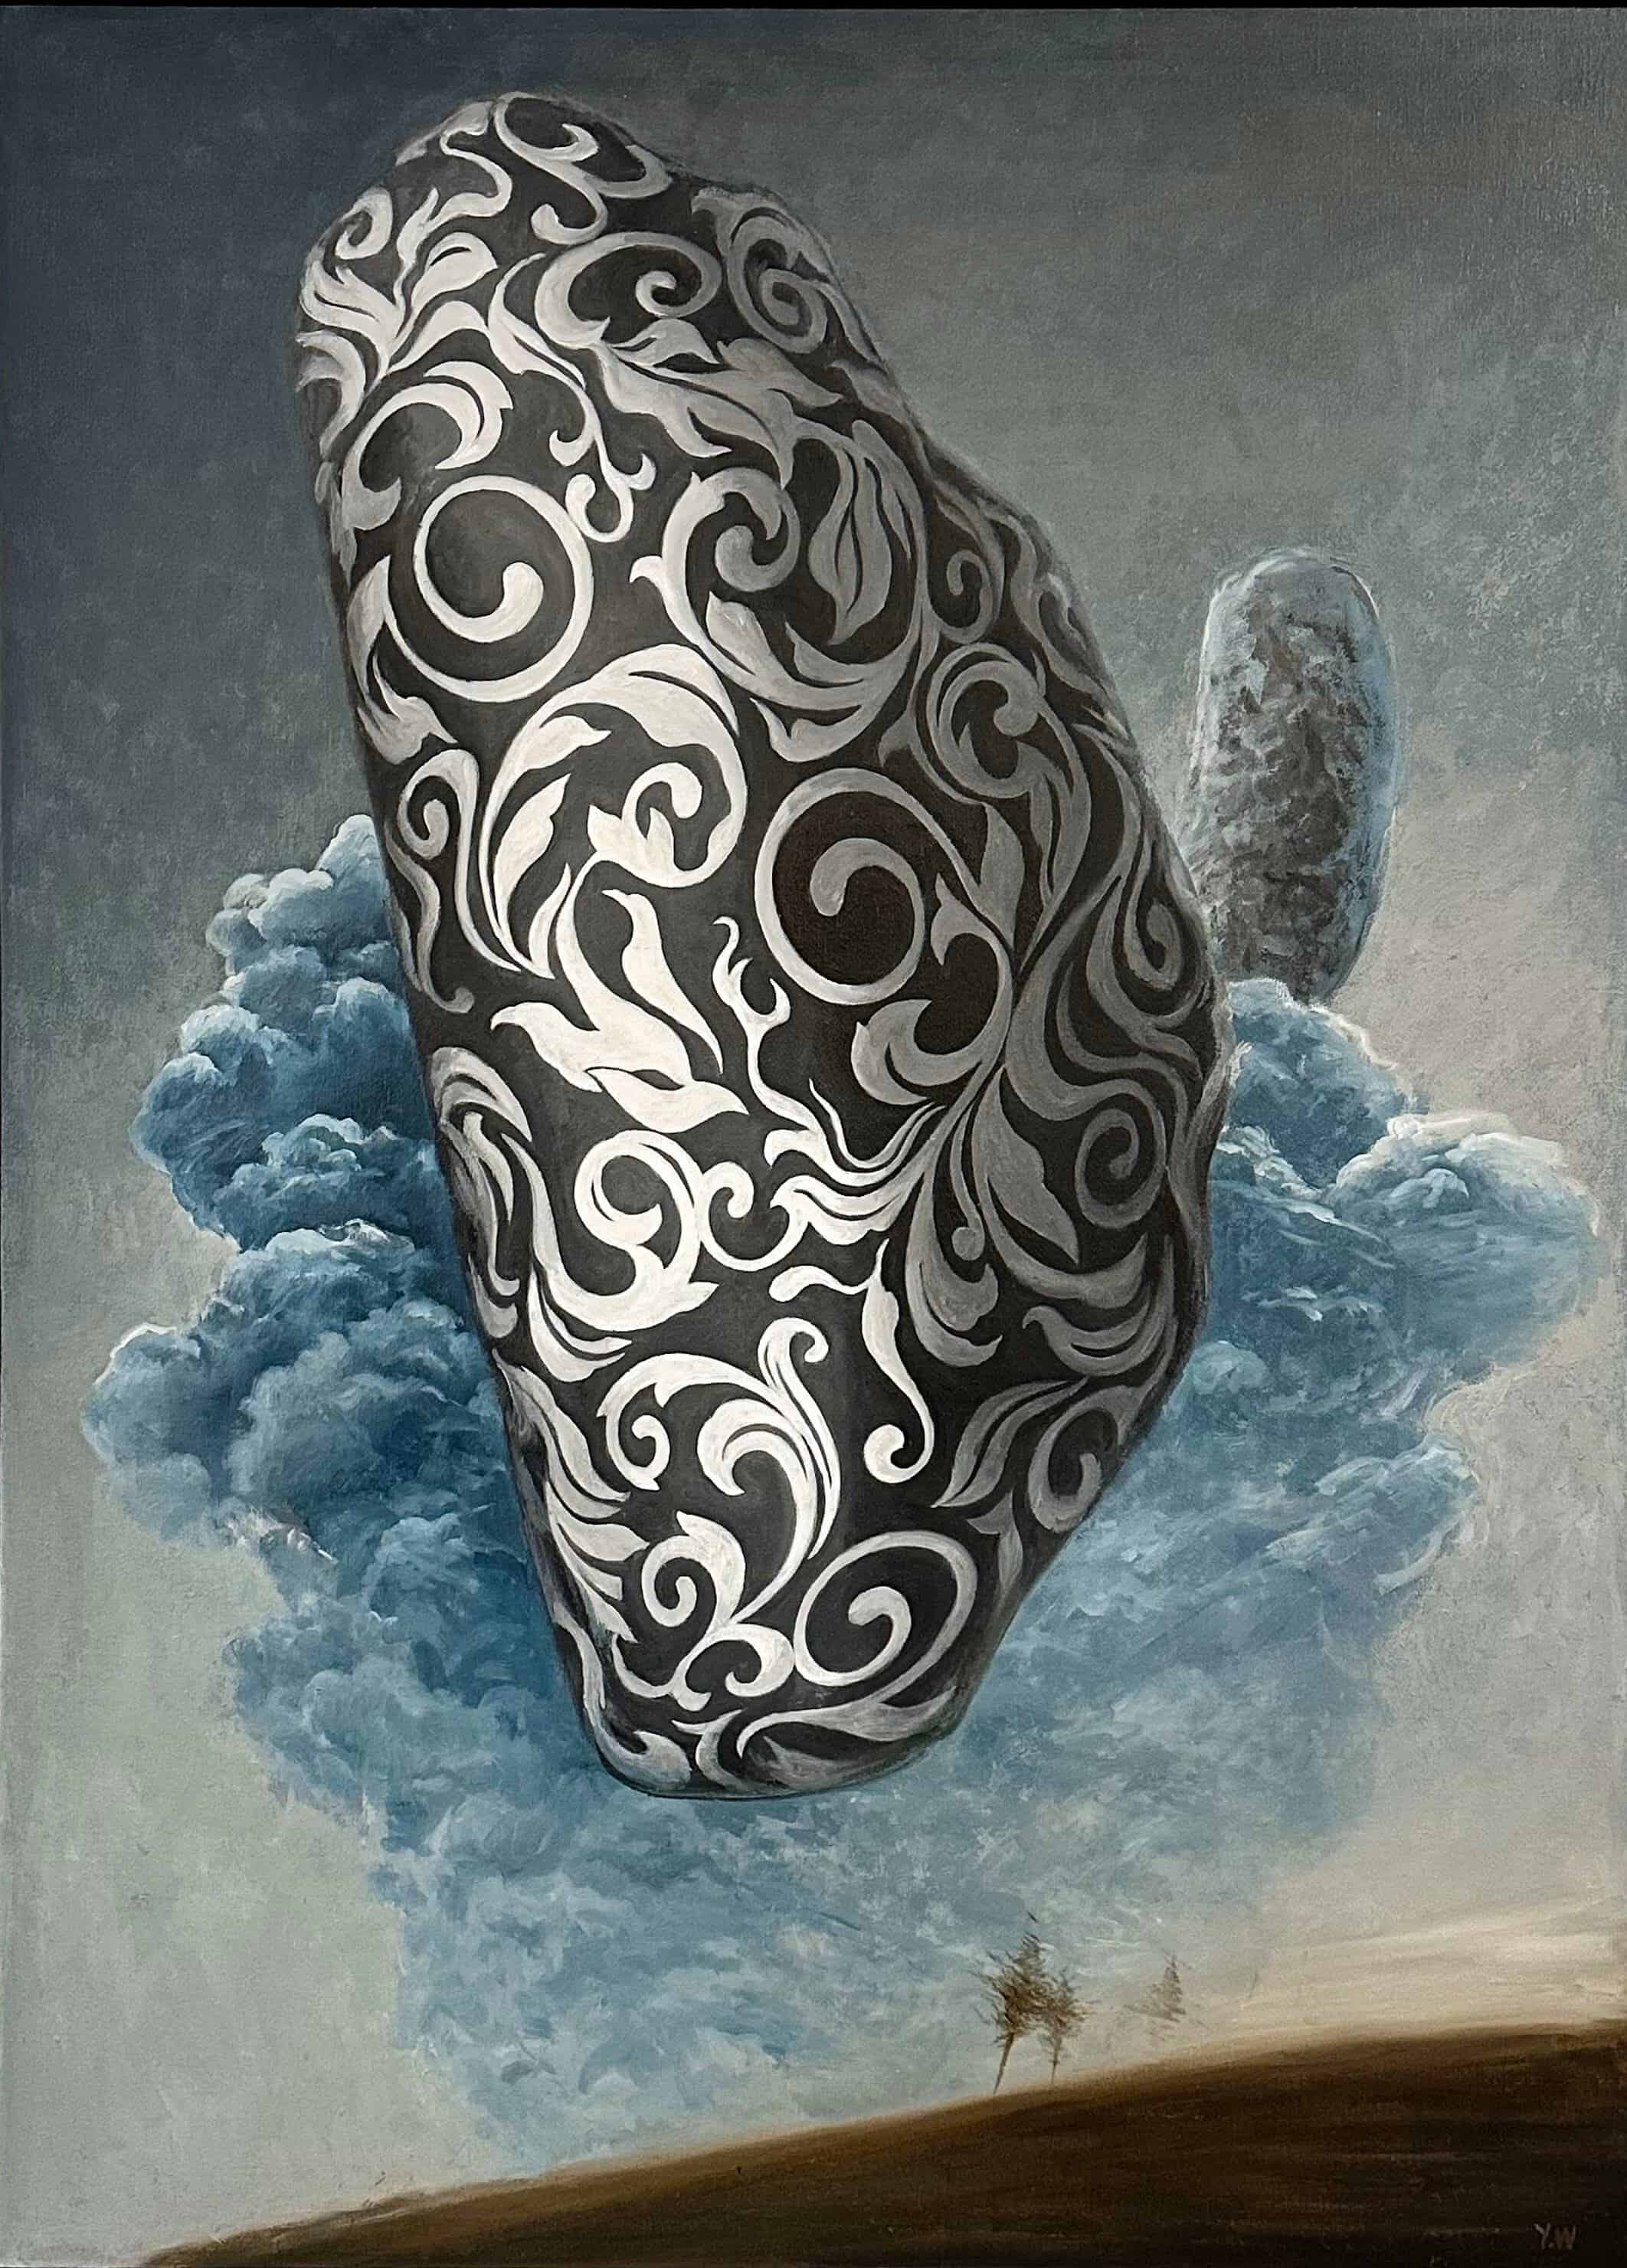 Contemporary Art. Title: Ascent, Oil on Canvas, 39 x 31 in by Canadian artist Wu Yang.